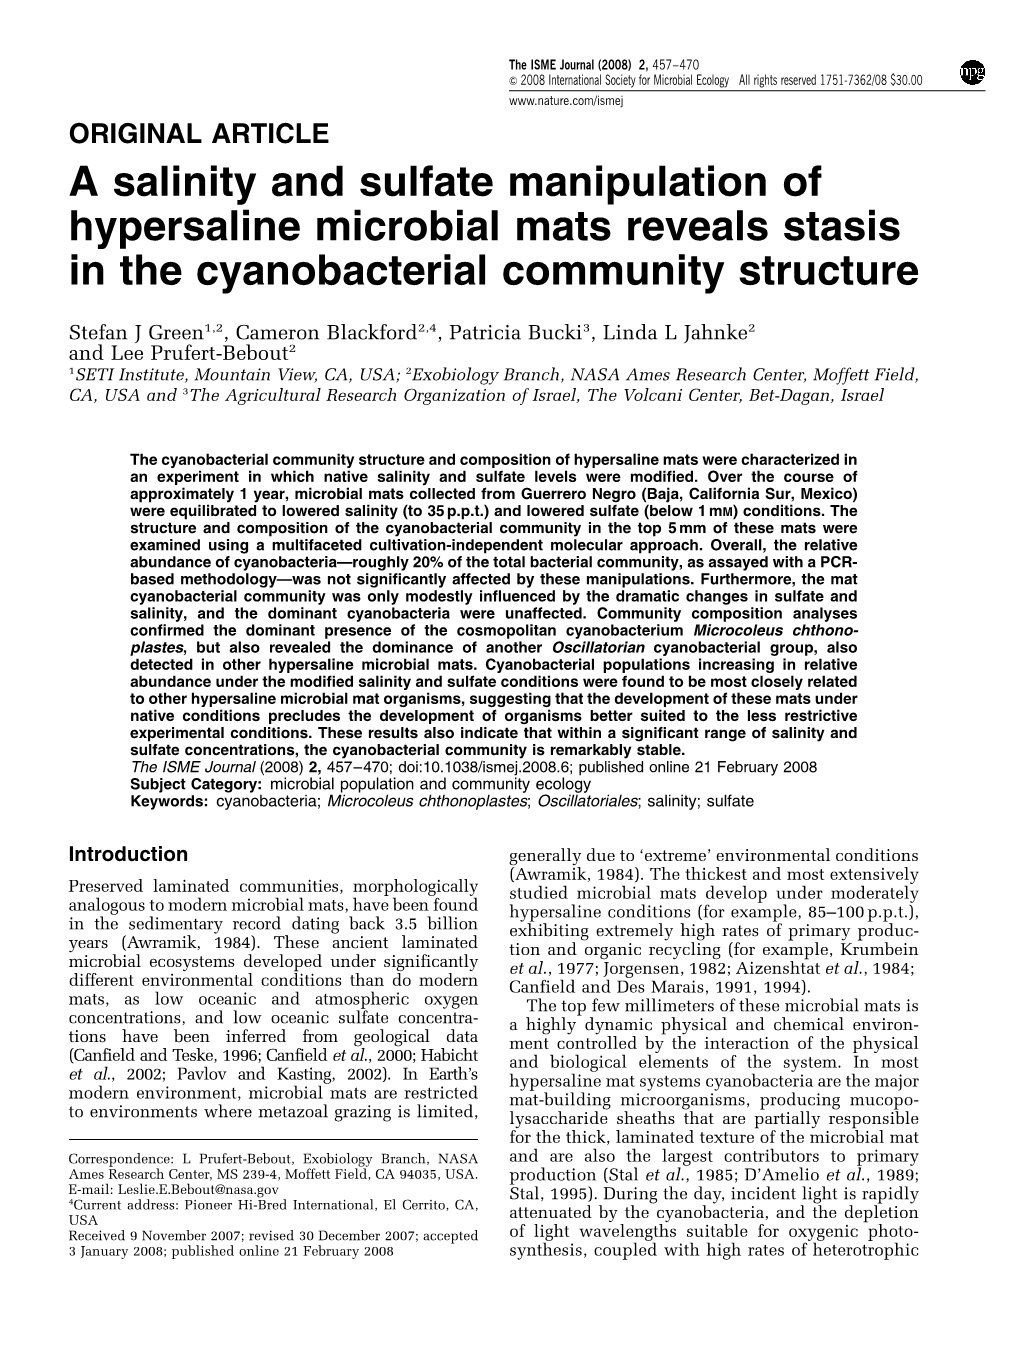 A Salinity and Sulfate Manipulation of Hypersaline Microbial Mats Reveals Stasis in the Cyanobacterial Community Structure